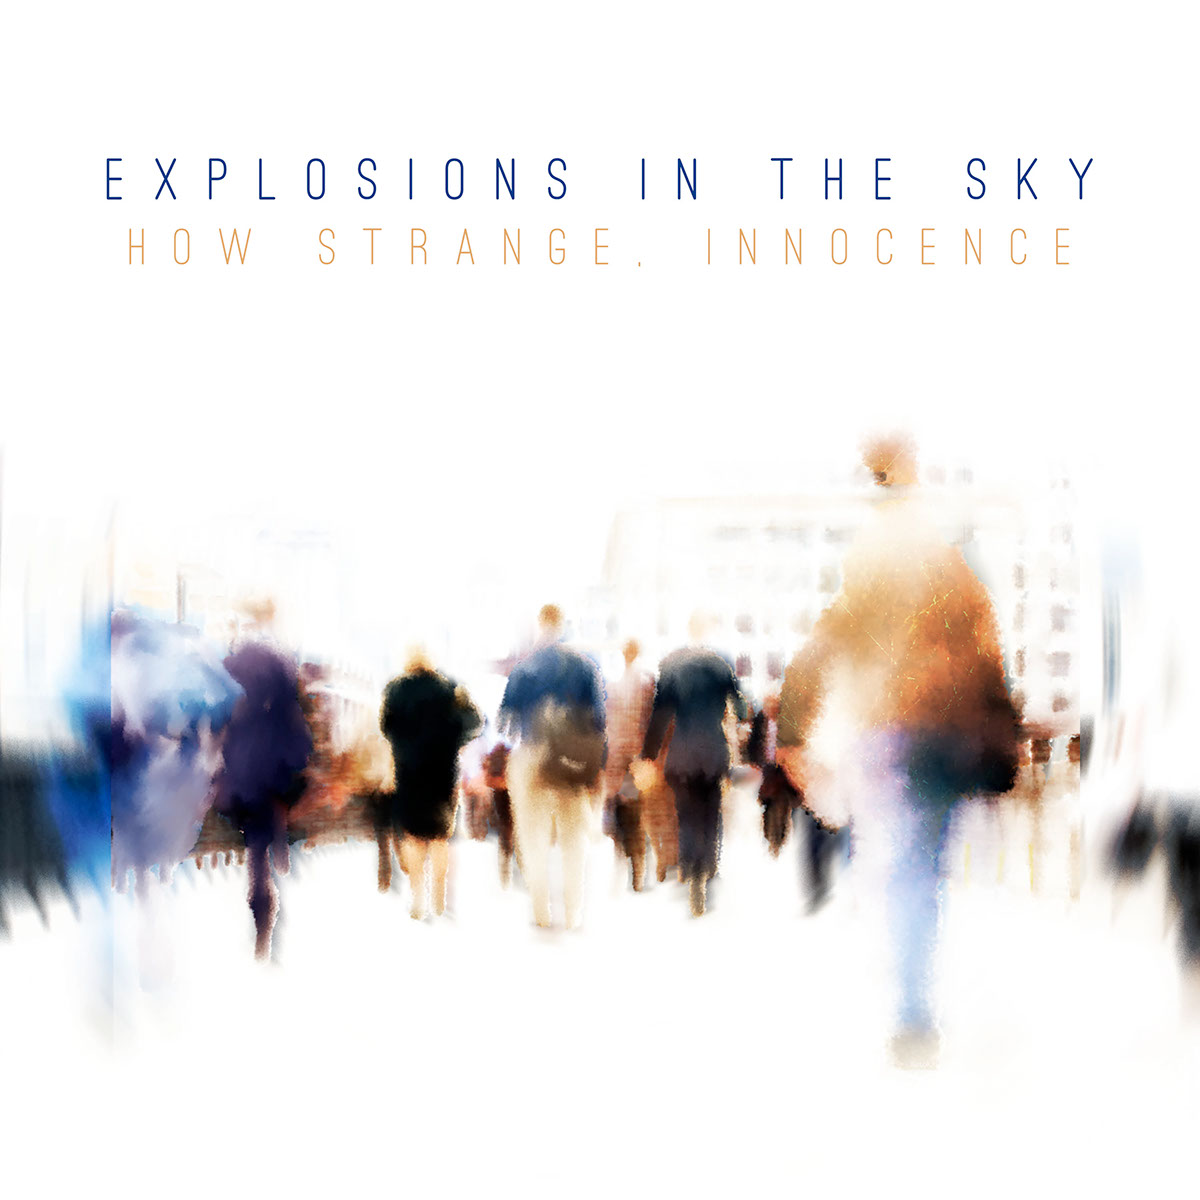 explosions IN the SKY explosions in the Album cover concept innocence how strange post rock post-rock